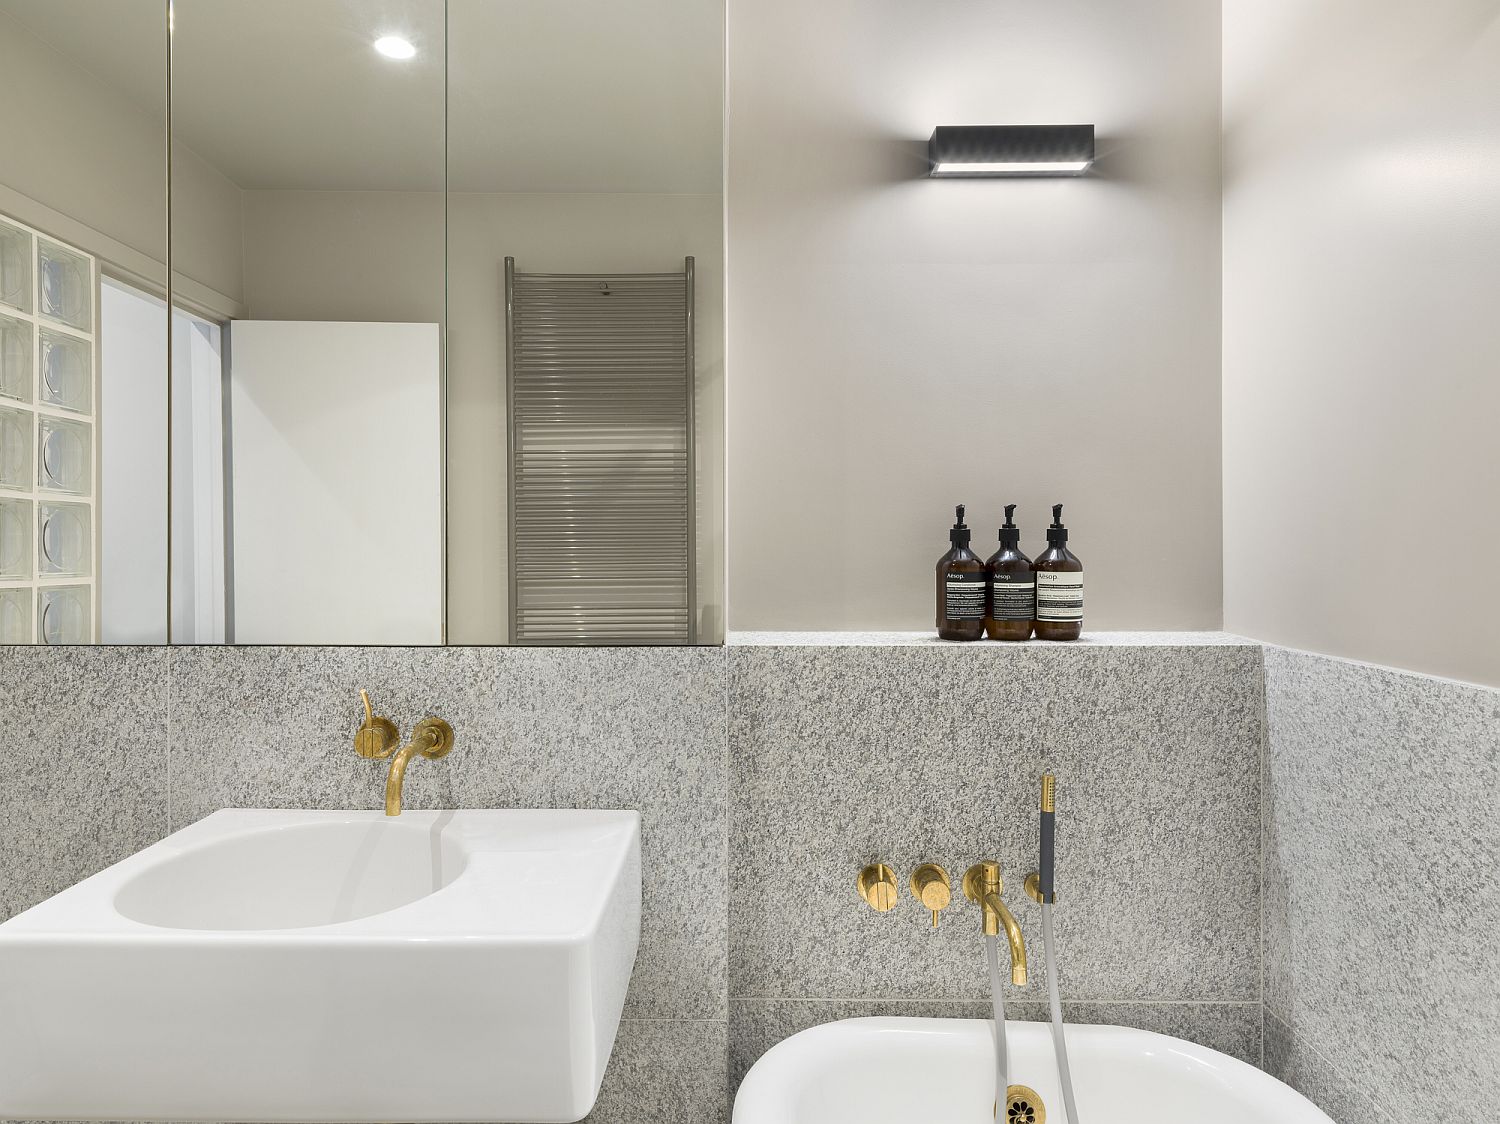 Metallic-glint-brings-brightness-to-this-modern-bathroom-in-white-and-gray